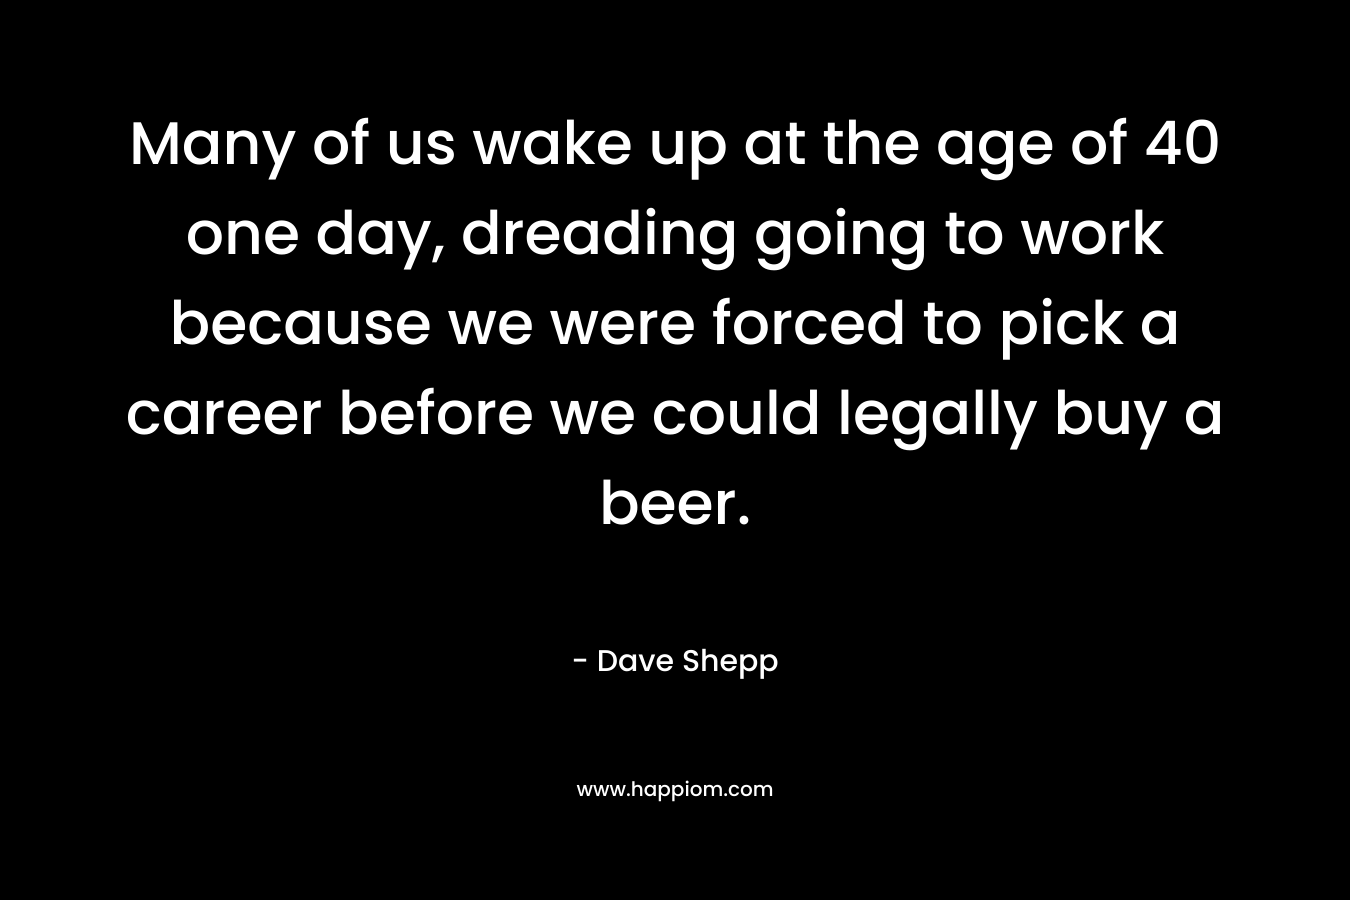 Many of us wake up at the age of 40 one day, dreading going to work because we were forced to pick a career before we could legally buy a beer.